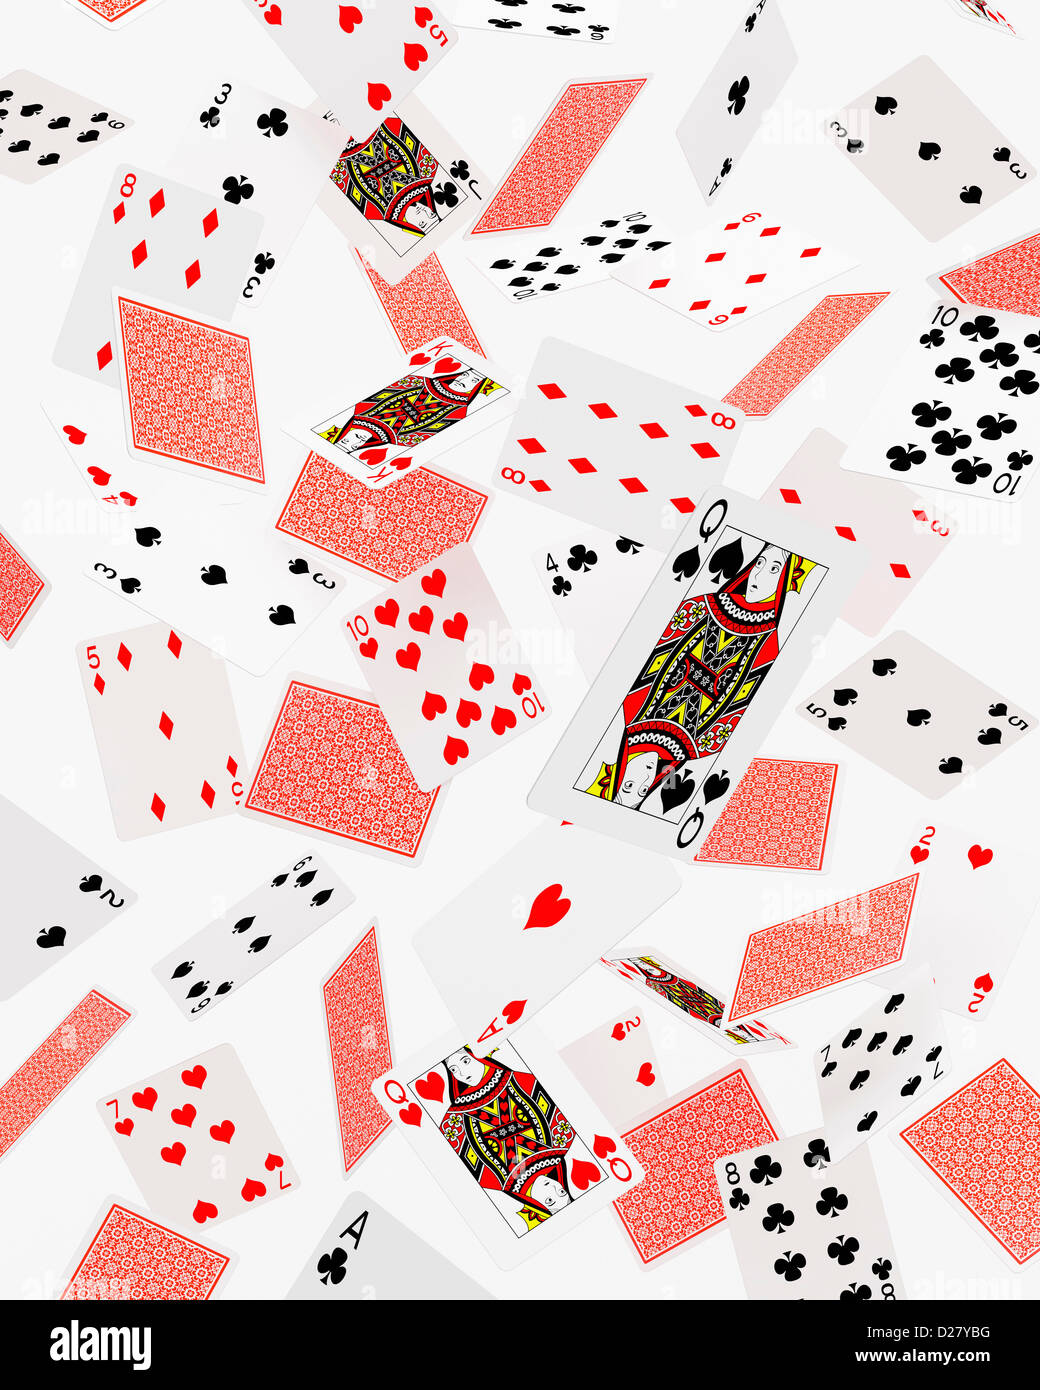 Falling cards on a white background Stock Photo